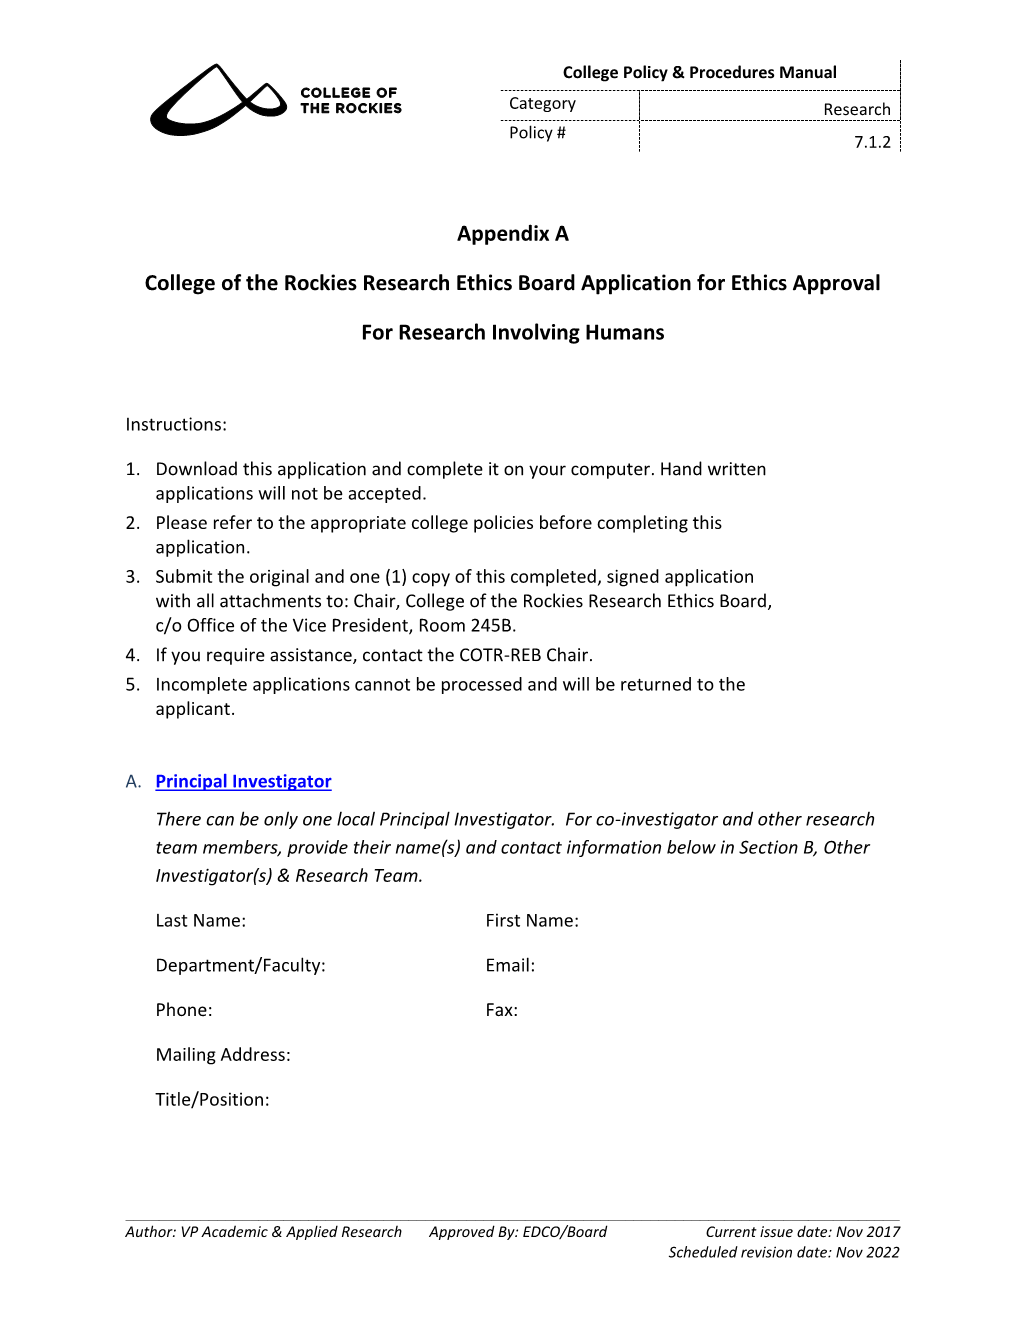 Appendix a College of the Rockies Research Ethics Board Application